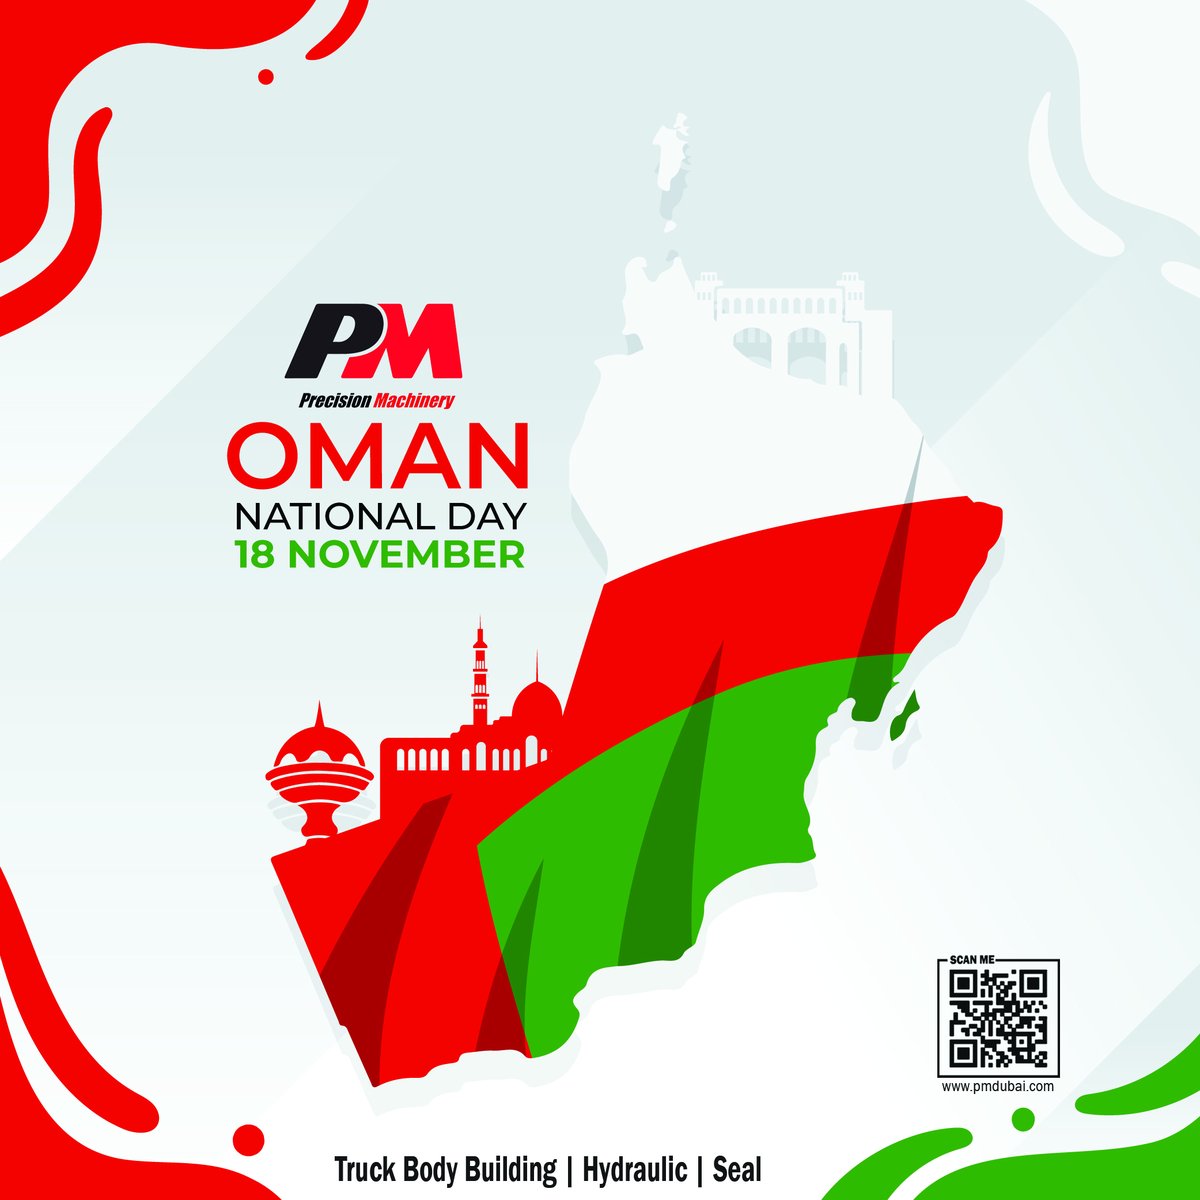 Happy National Day, Oman! Precision Machinery (PM) UAE extends heartfelt wishes on this joyous occasion. May the spirit of unity and pride continue to shine brightly in the Sultanate
contact number : +971 556036959
#omannationalday #oman #pmtruck #truckbodybuilder #hydraulicpump